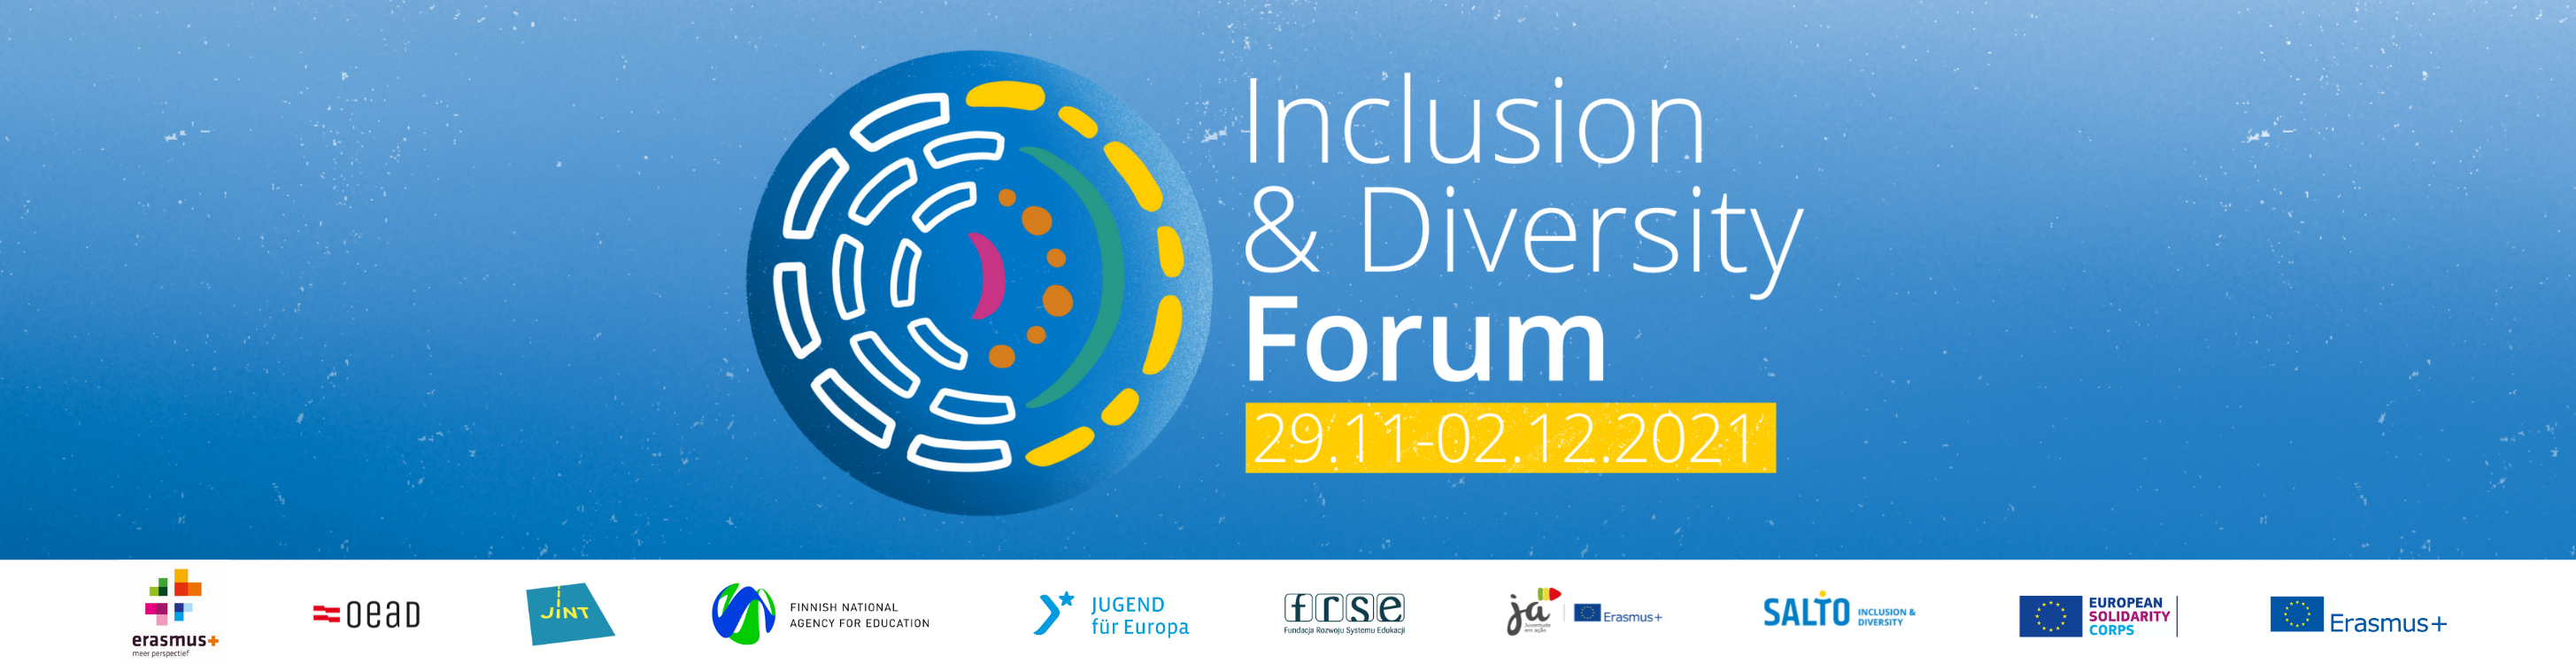 Picture: Inclusion and diversity forum, Ostend, Belgium, from November 29 to December 2, 2021